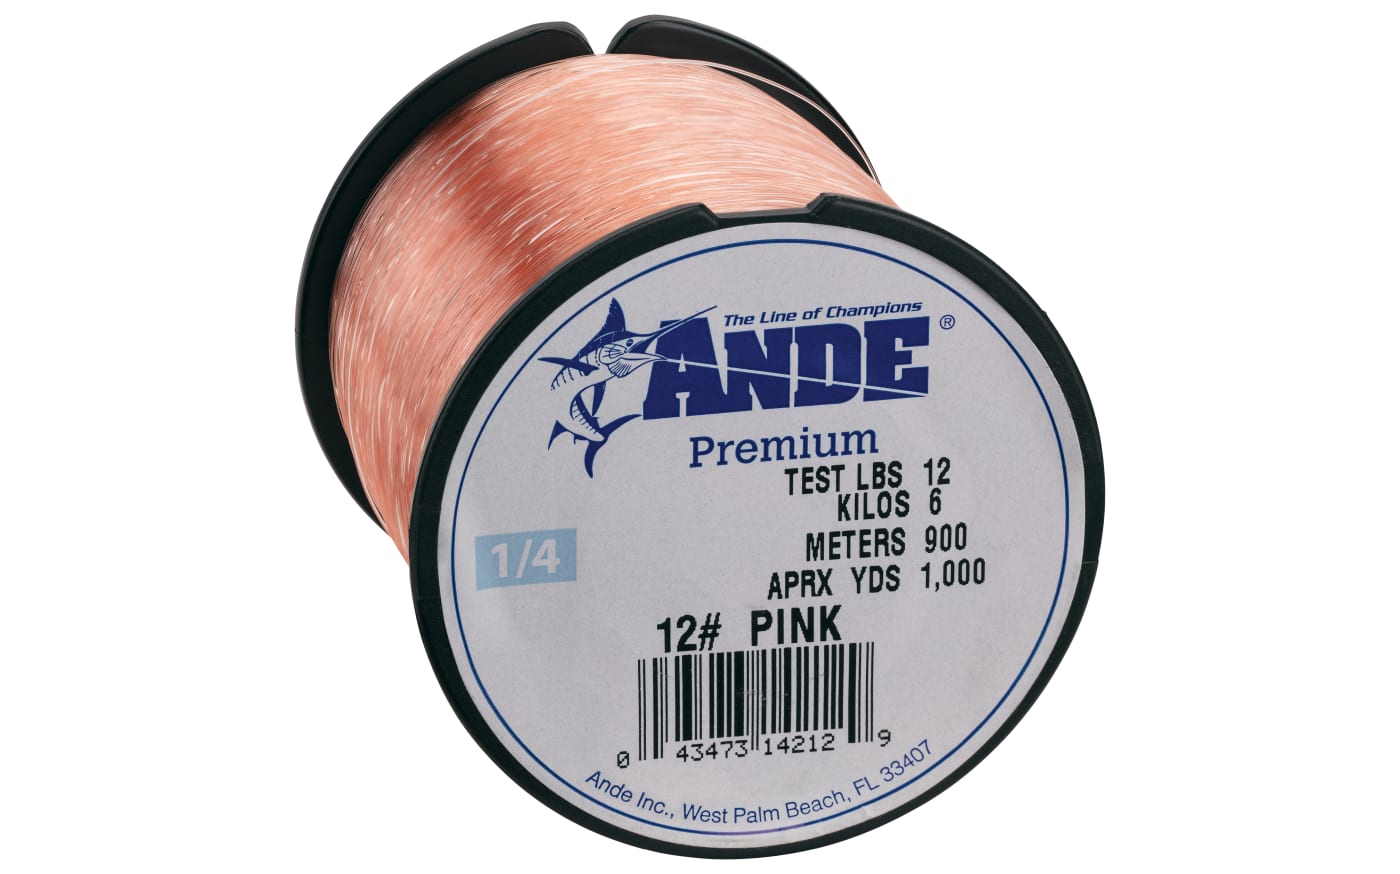 Ande Monofilament Line (Pink, 50 -Pounds Test, 1/4# Spool)